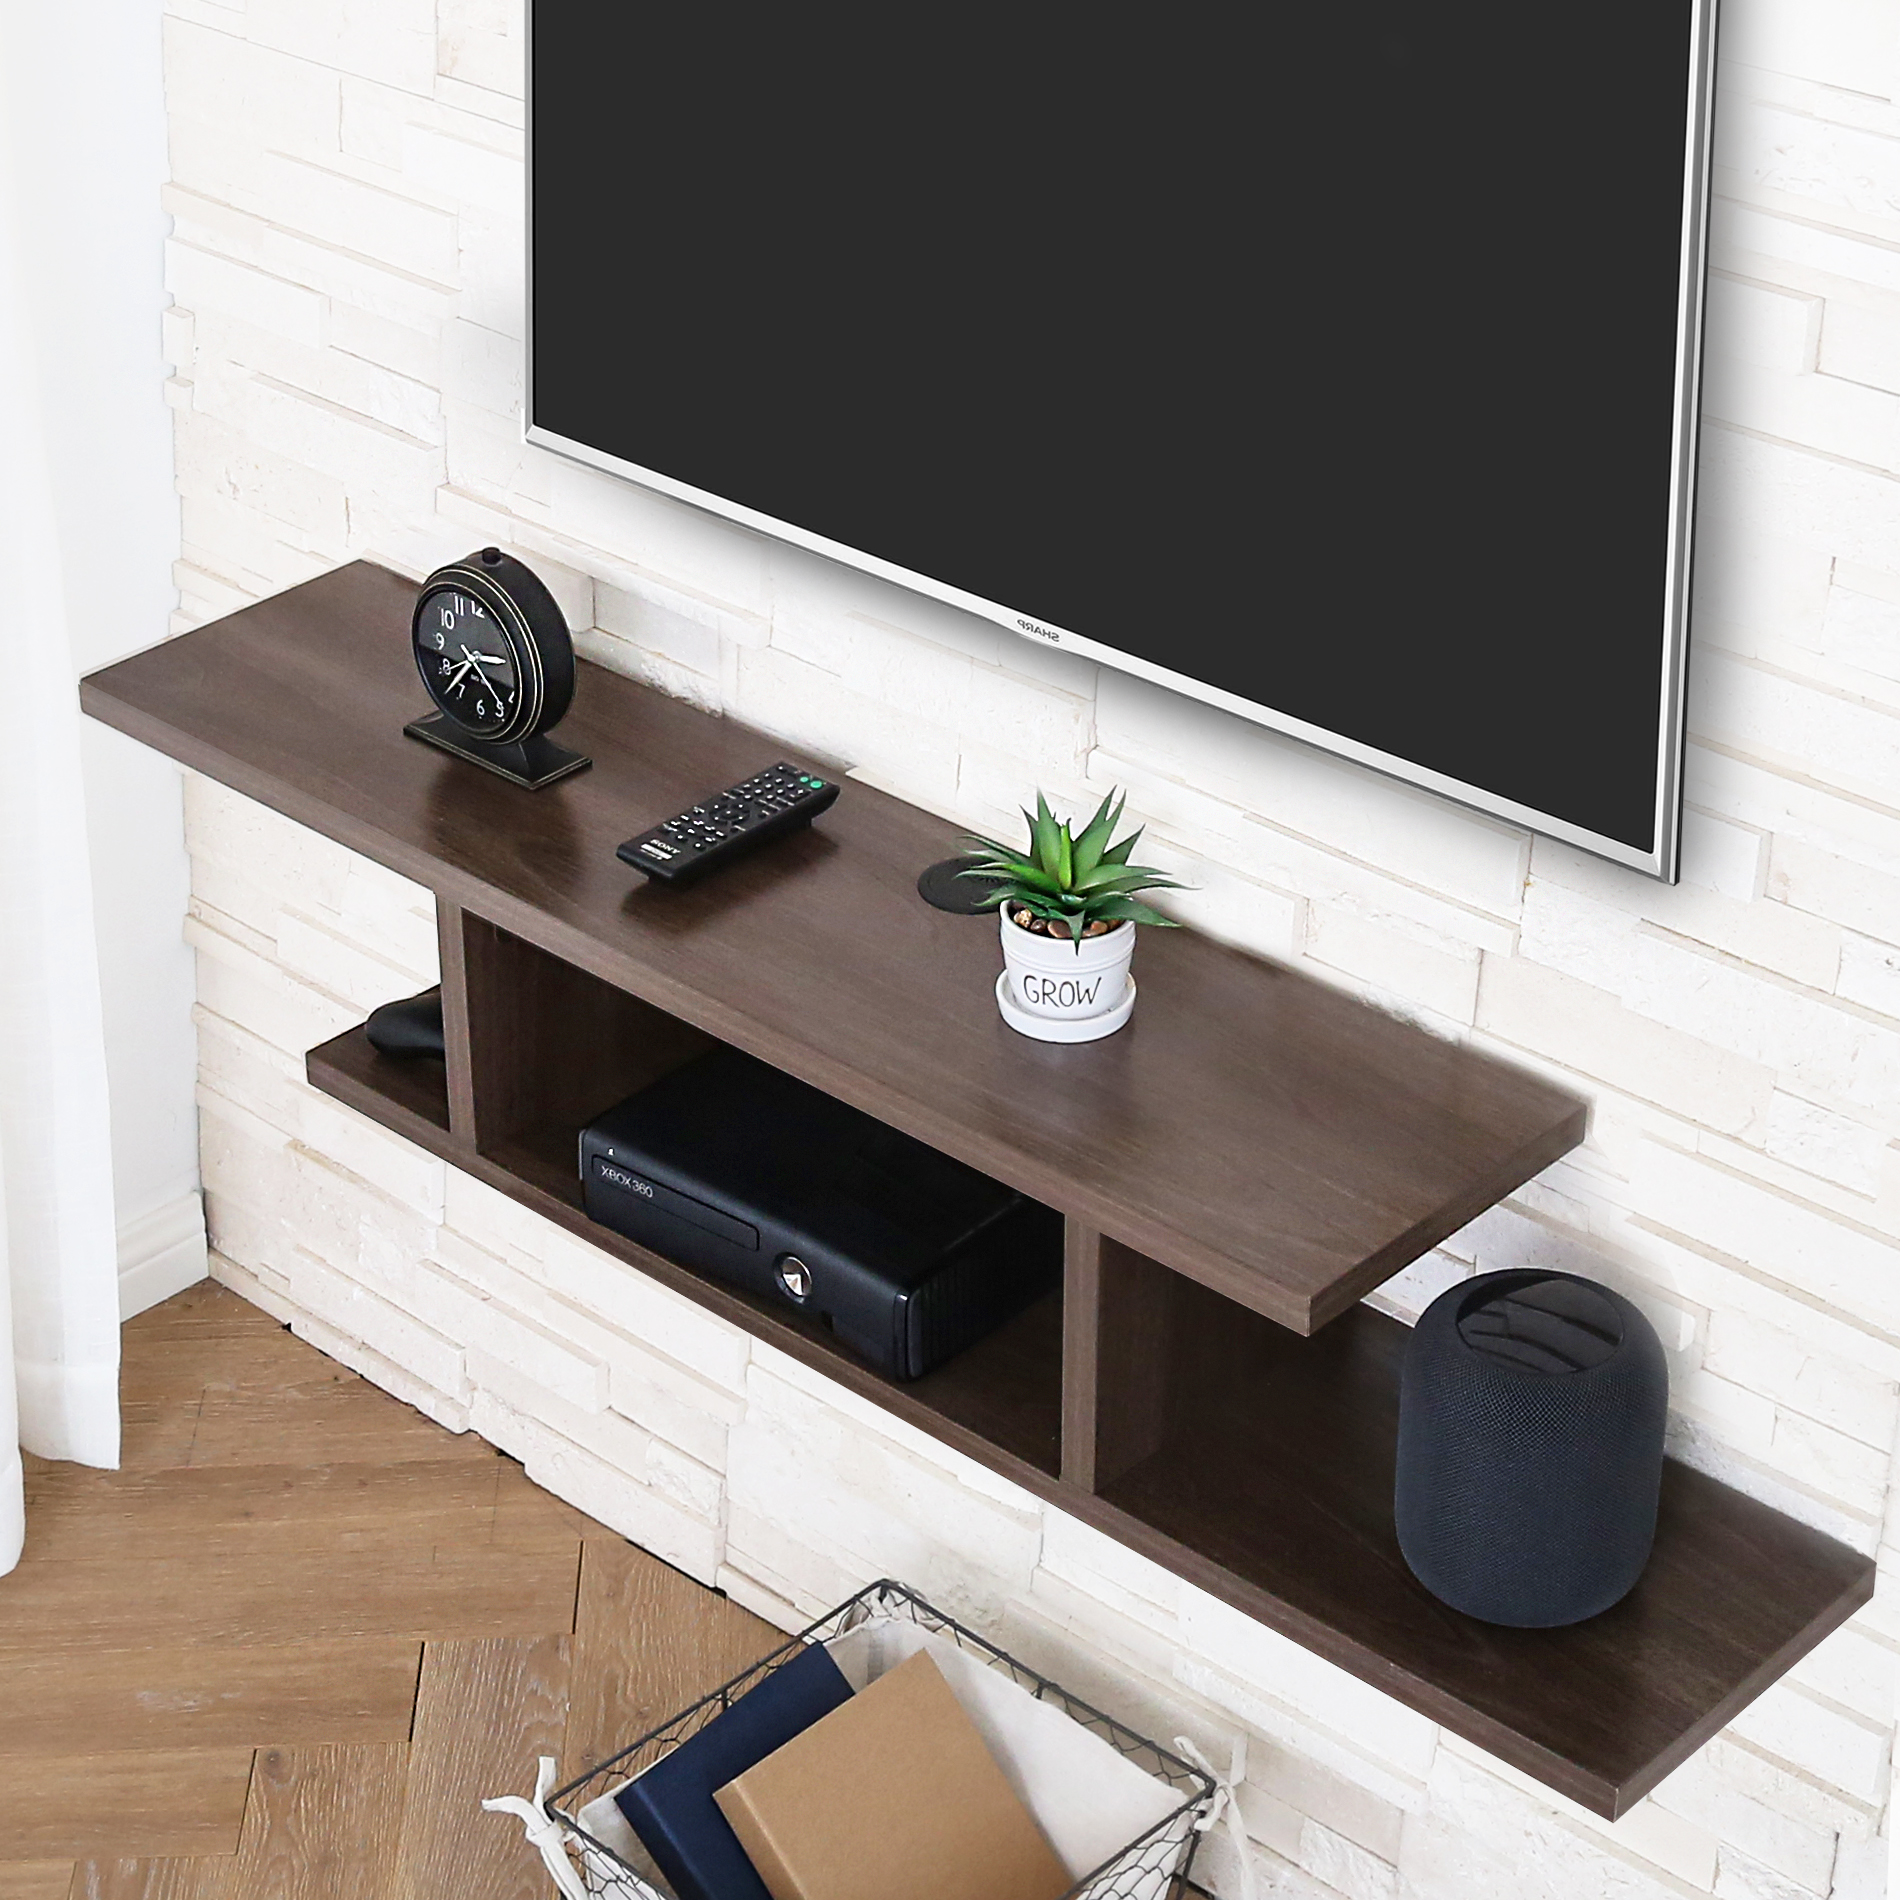 FITUEYES Floating Wall Mounted TV Console Storage Shelf Modern TV Stand Media Console Walnut DS211802WW - image 5 of 6